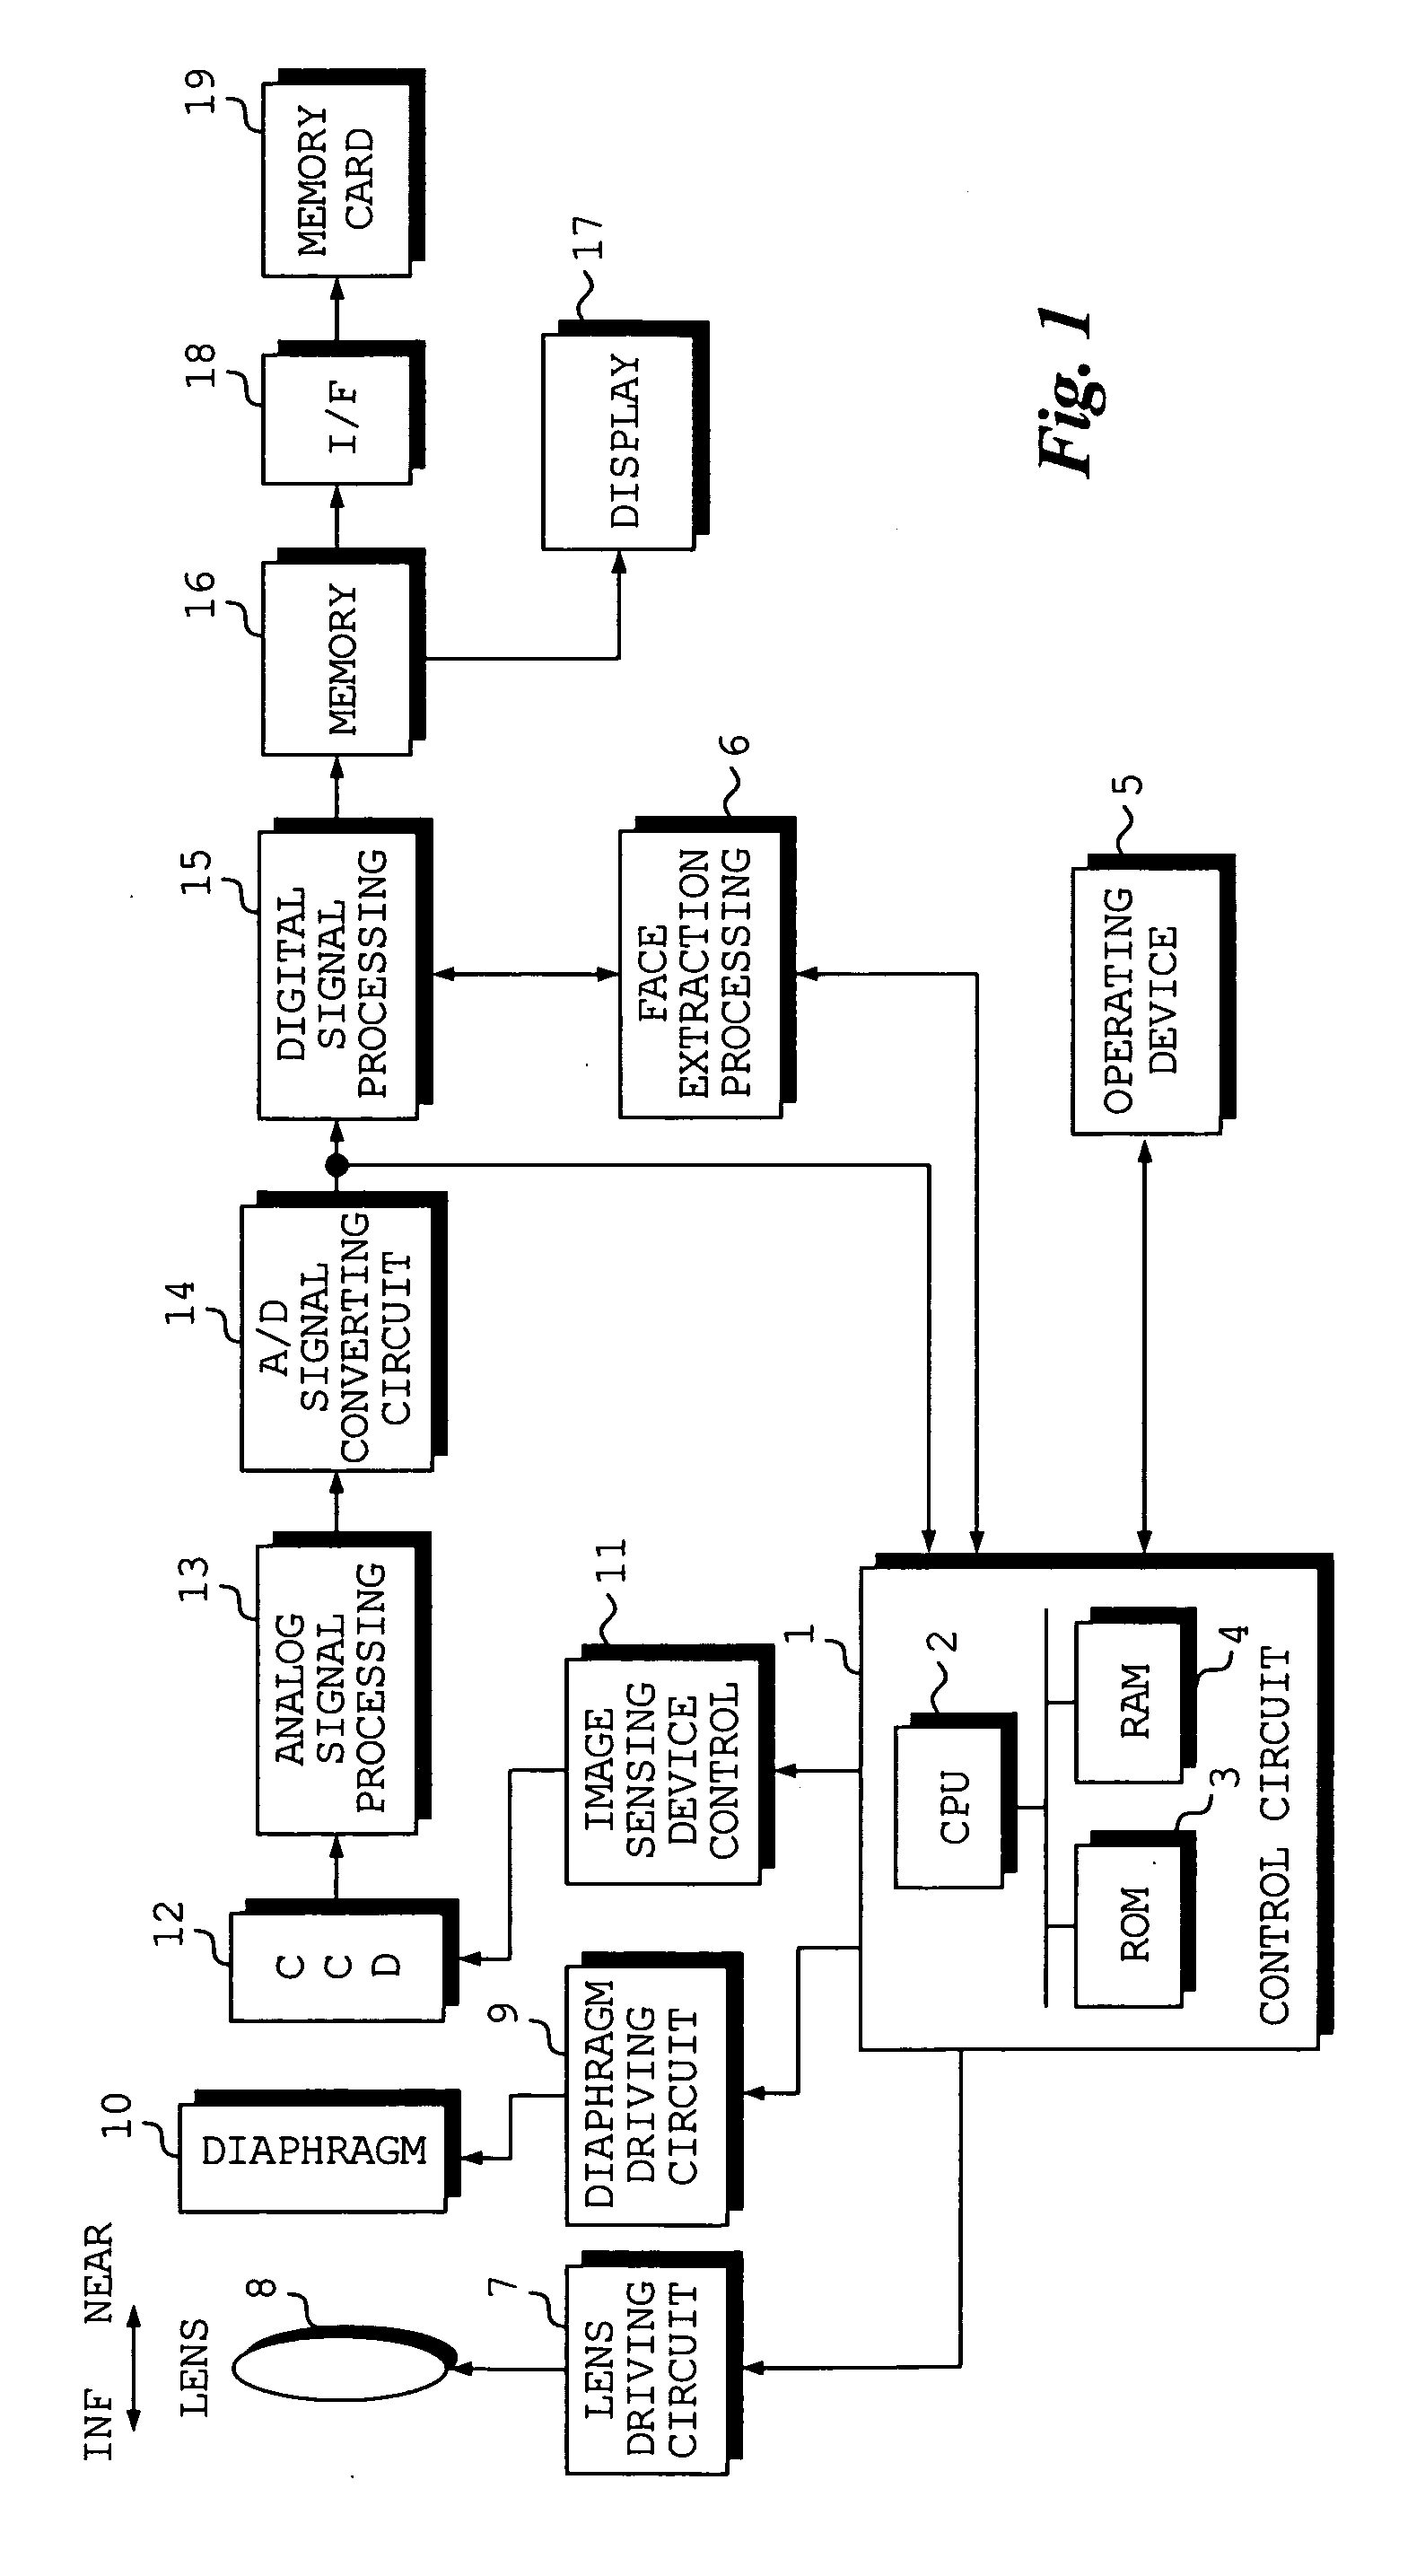 Apparatus and method for deciding in-focus position of imaging lens